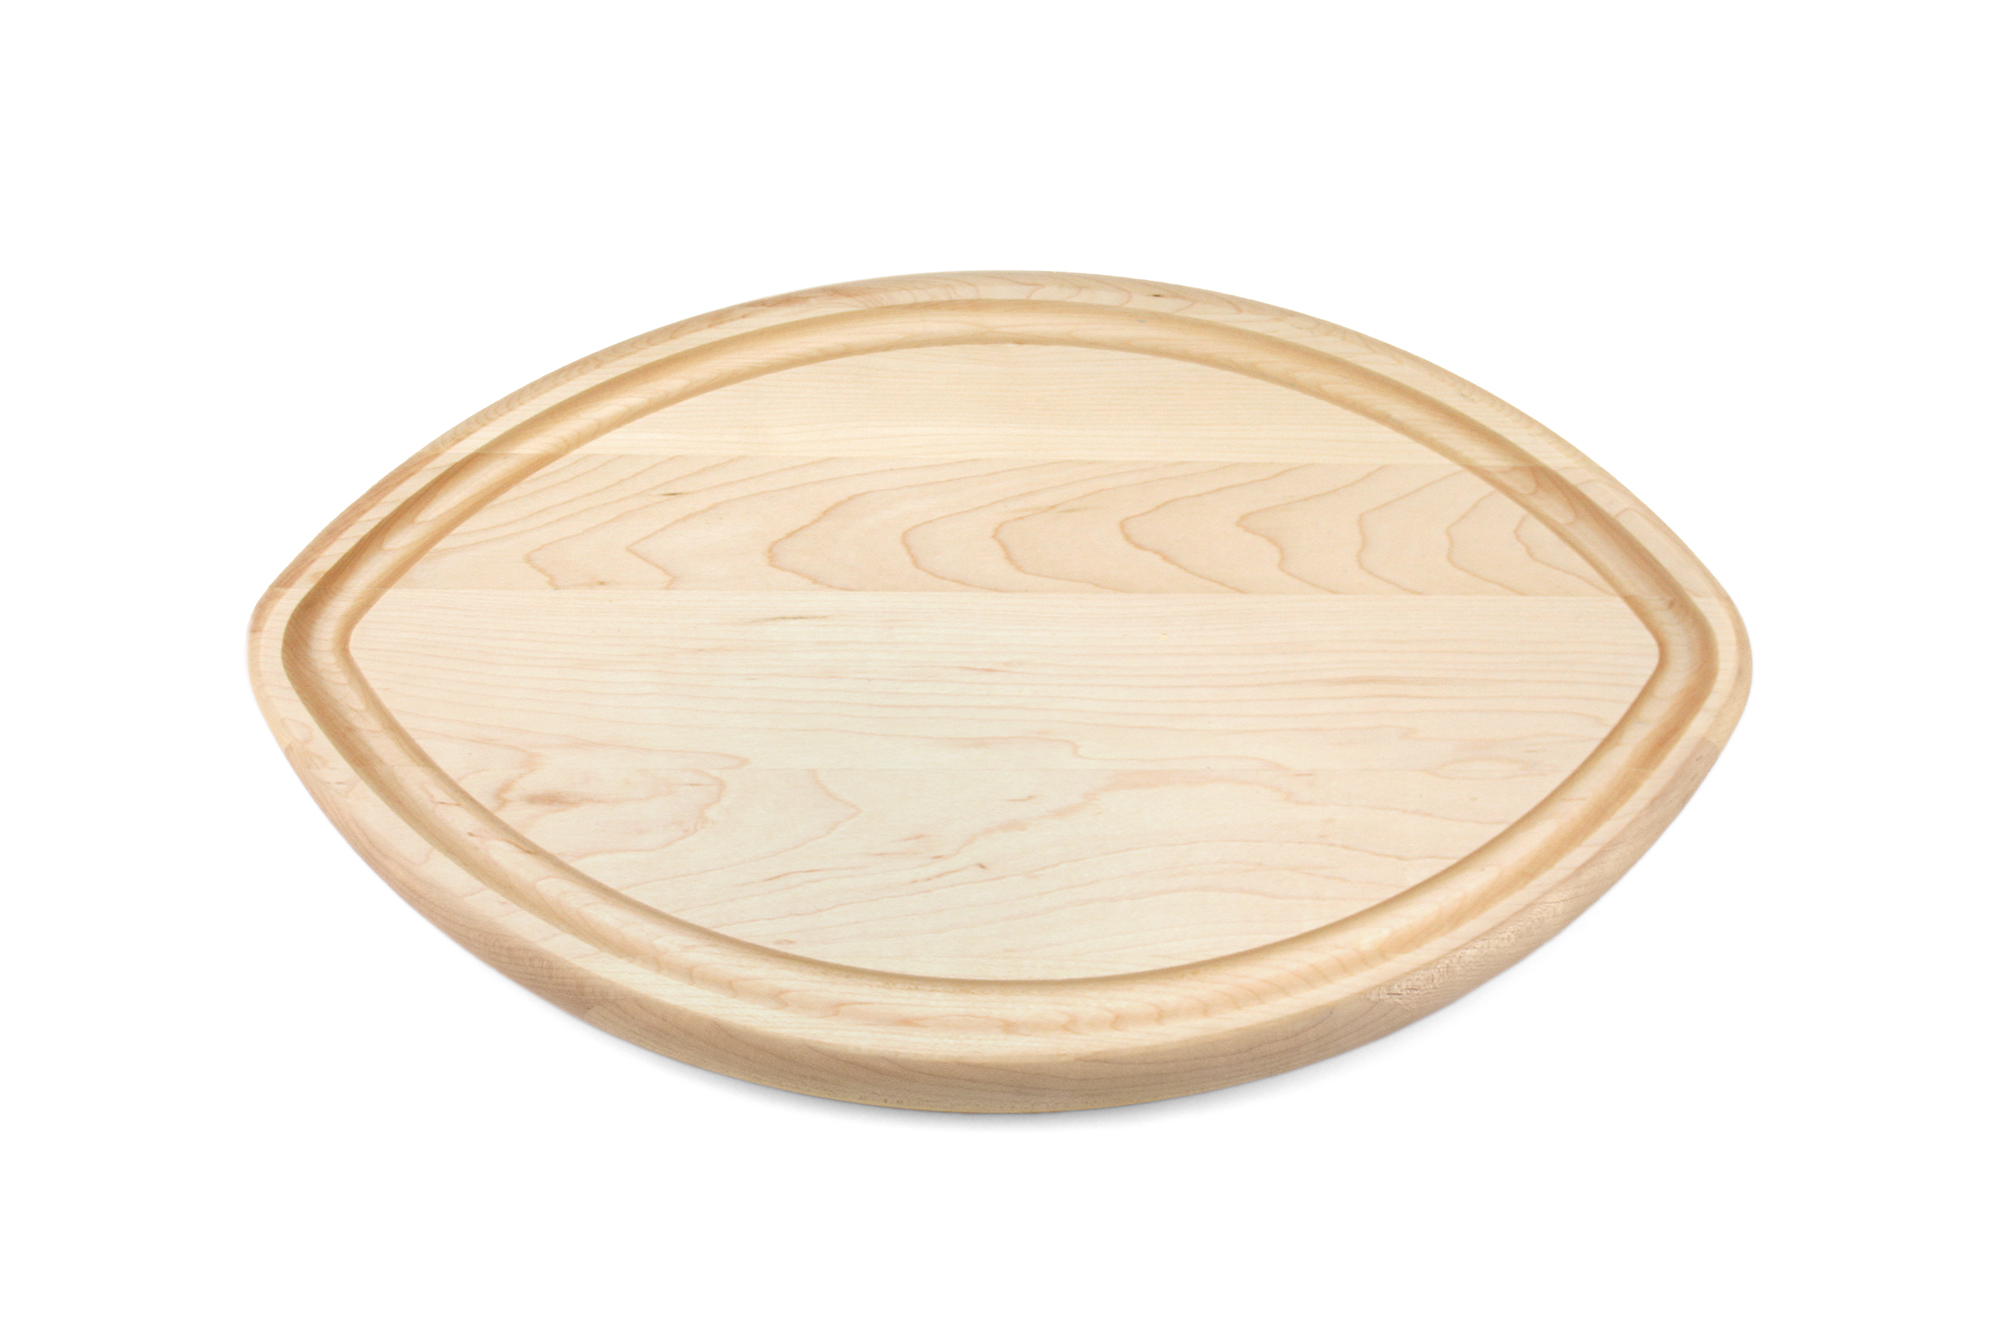 Football shaped cutting board with juice groove